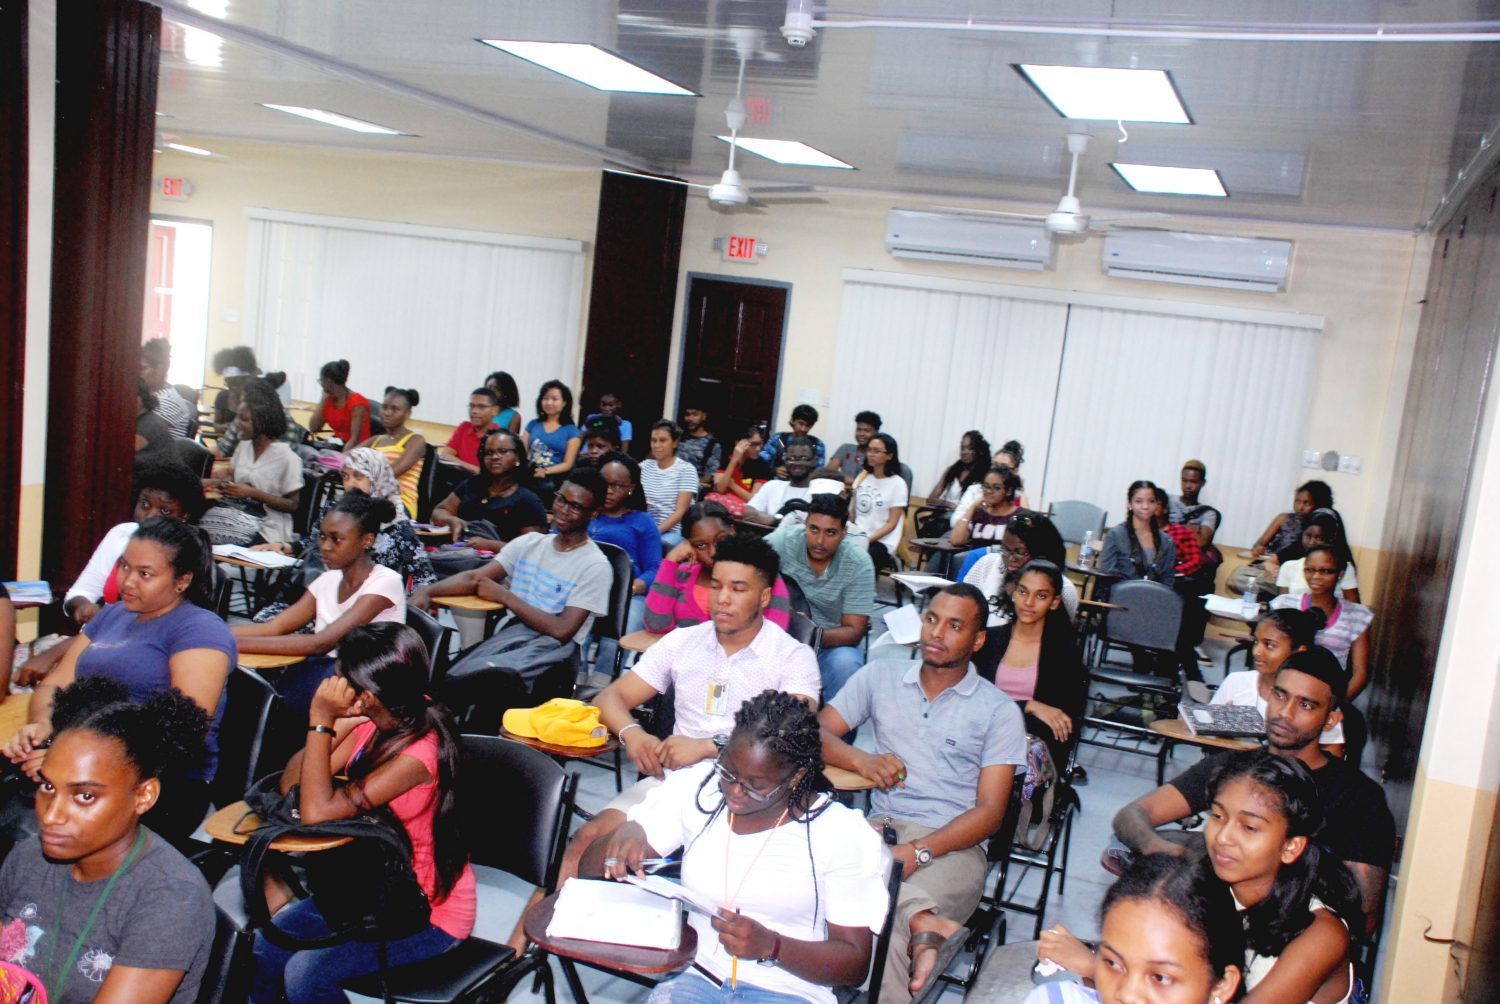 Up and running: A class in session at the University of Guyana’s School of Enterprise, Business and Innovation.